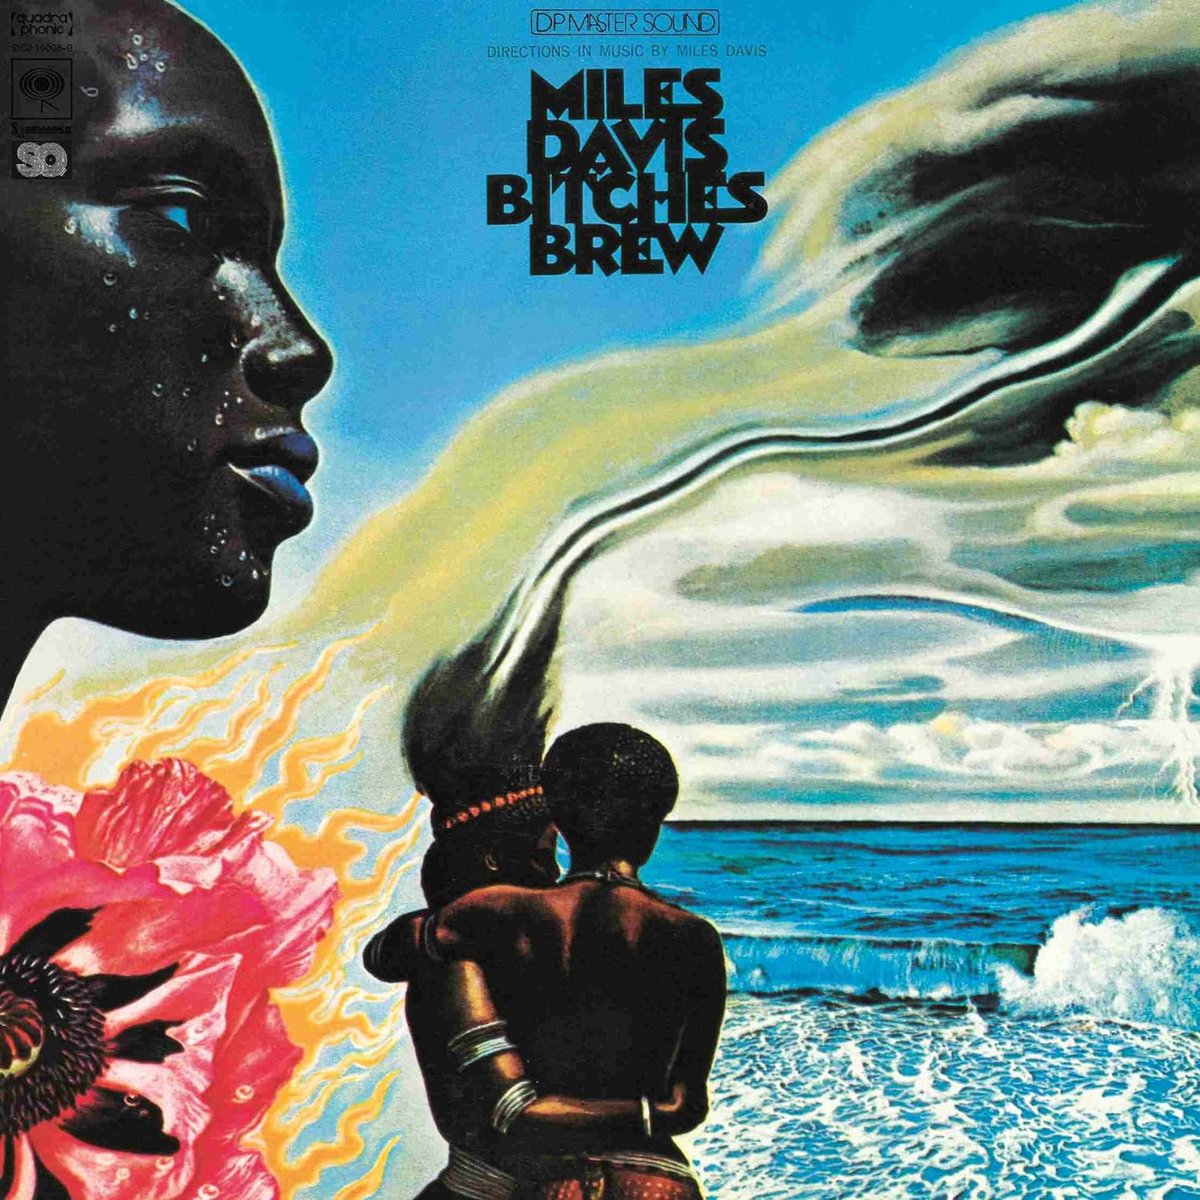 Ready to take your jazz journey to the next level? A thread 🧵 The following list provides a fantastic entry for intermediate jazz listeners looking to delve deeper into the genre... As always, feel free to add... 1. Miles Davis - Bitches Brew (1970)